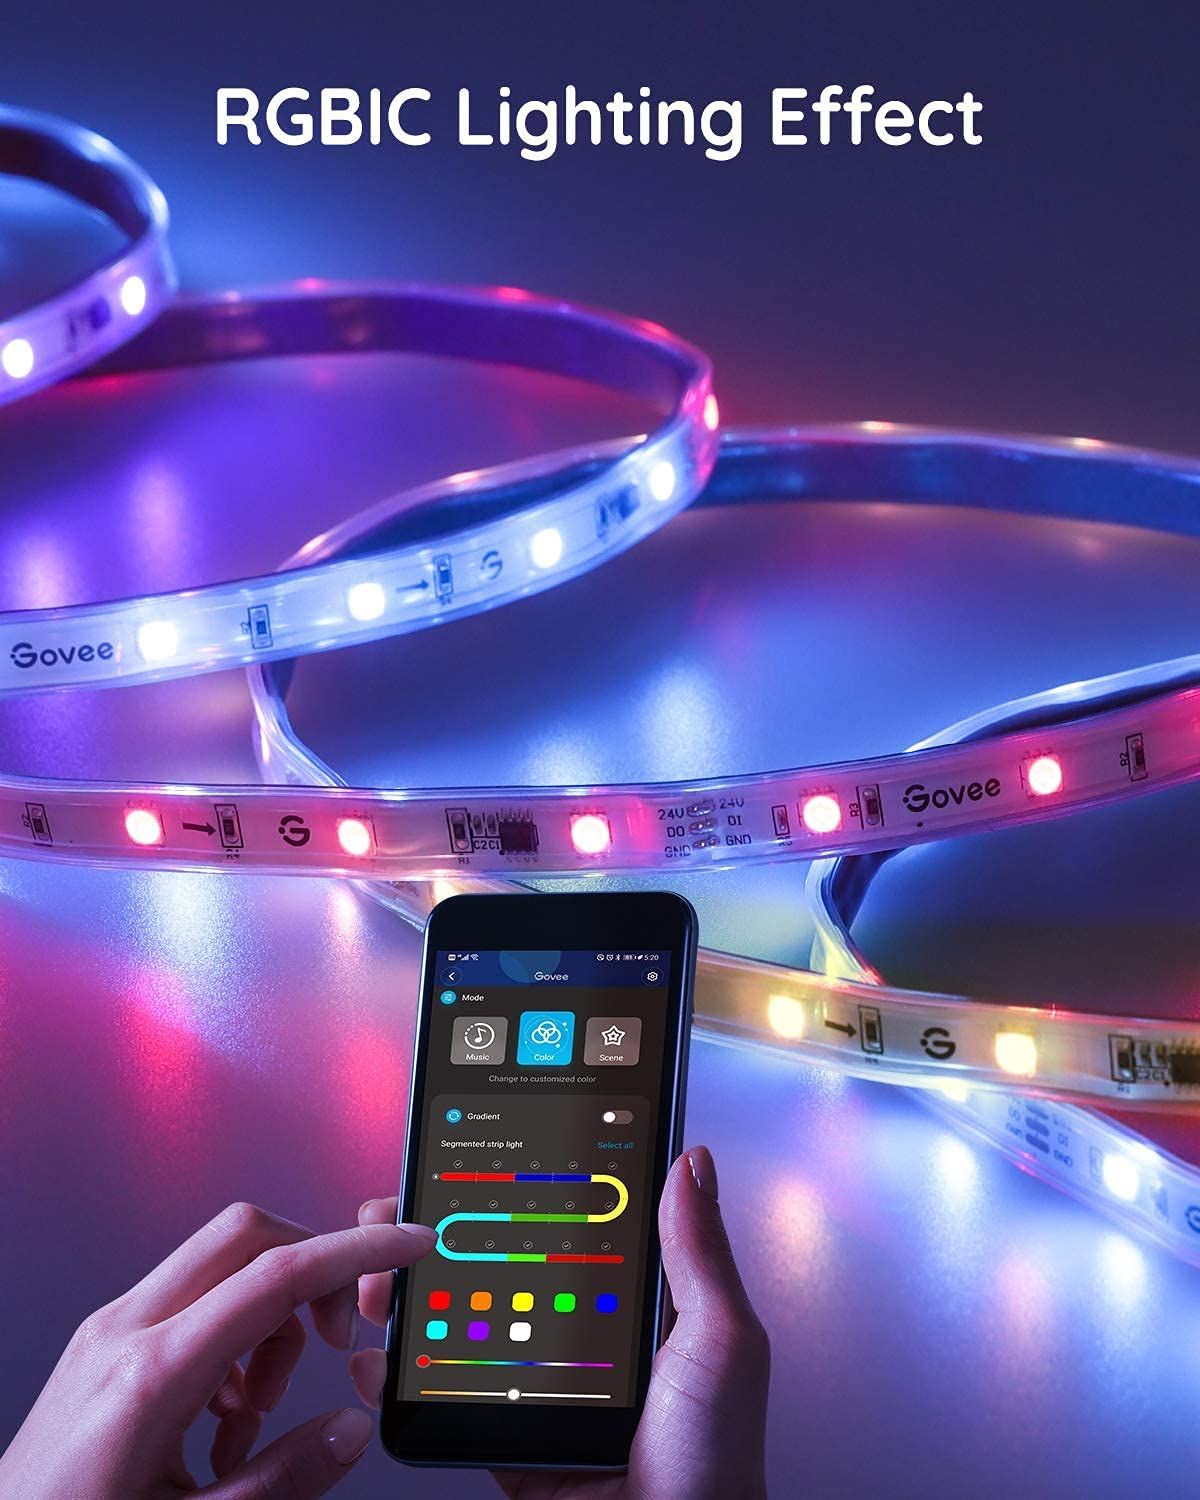 Govee Outdoor LED Strip Lights Effects